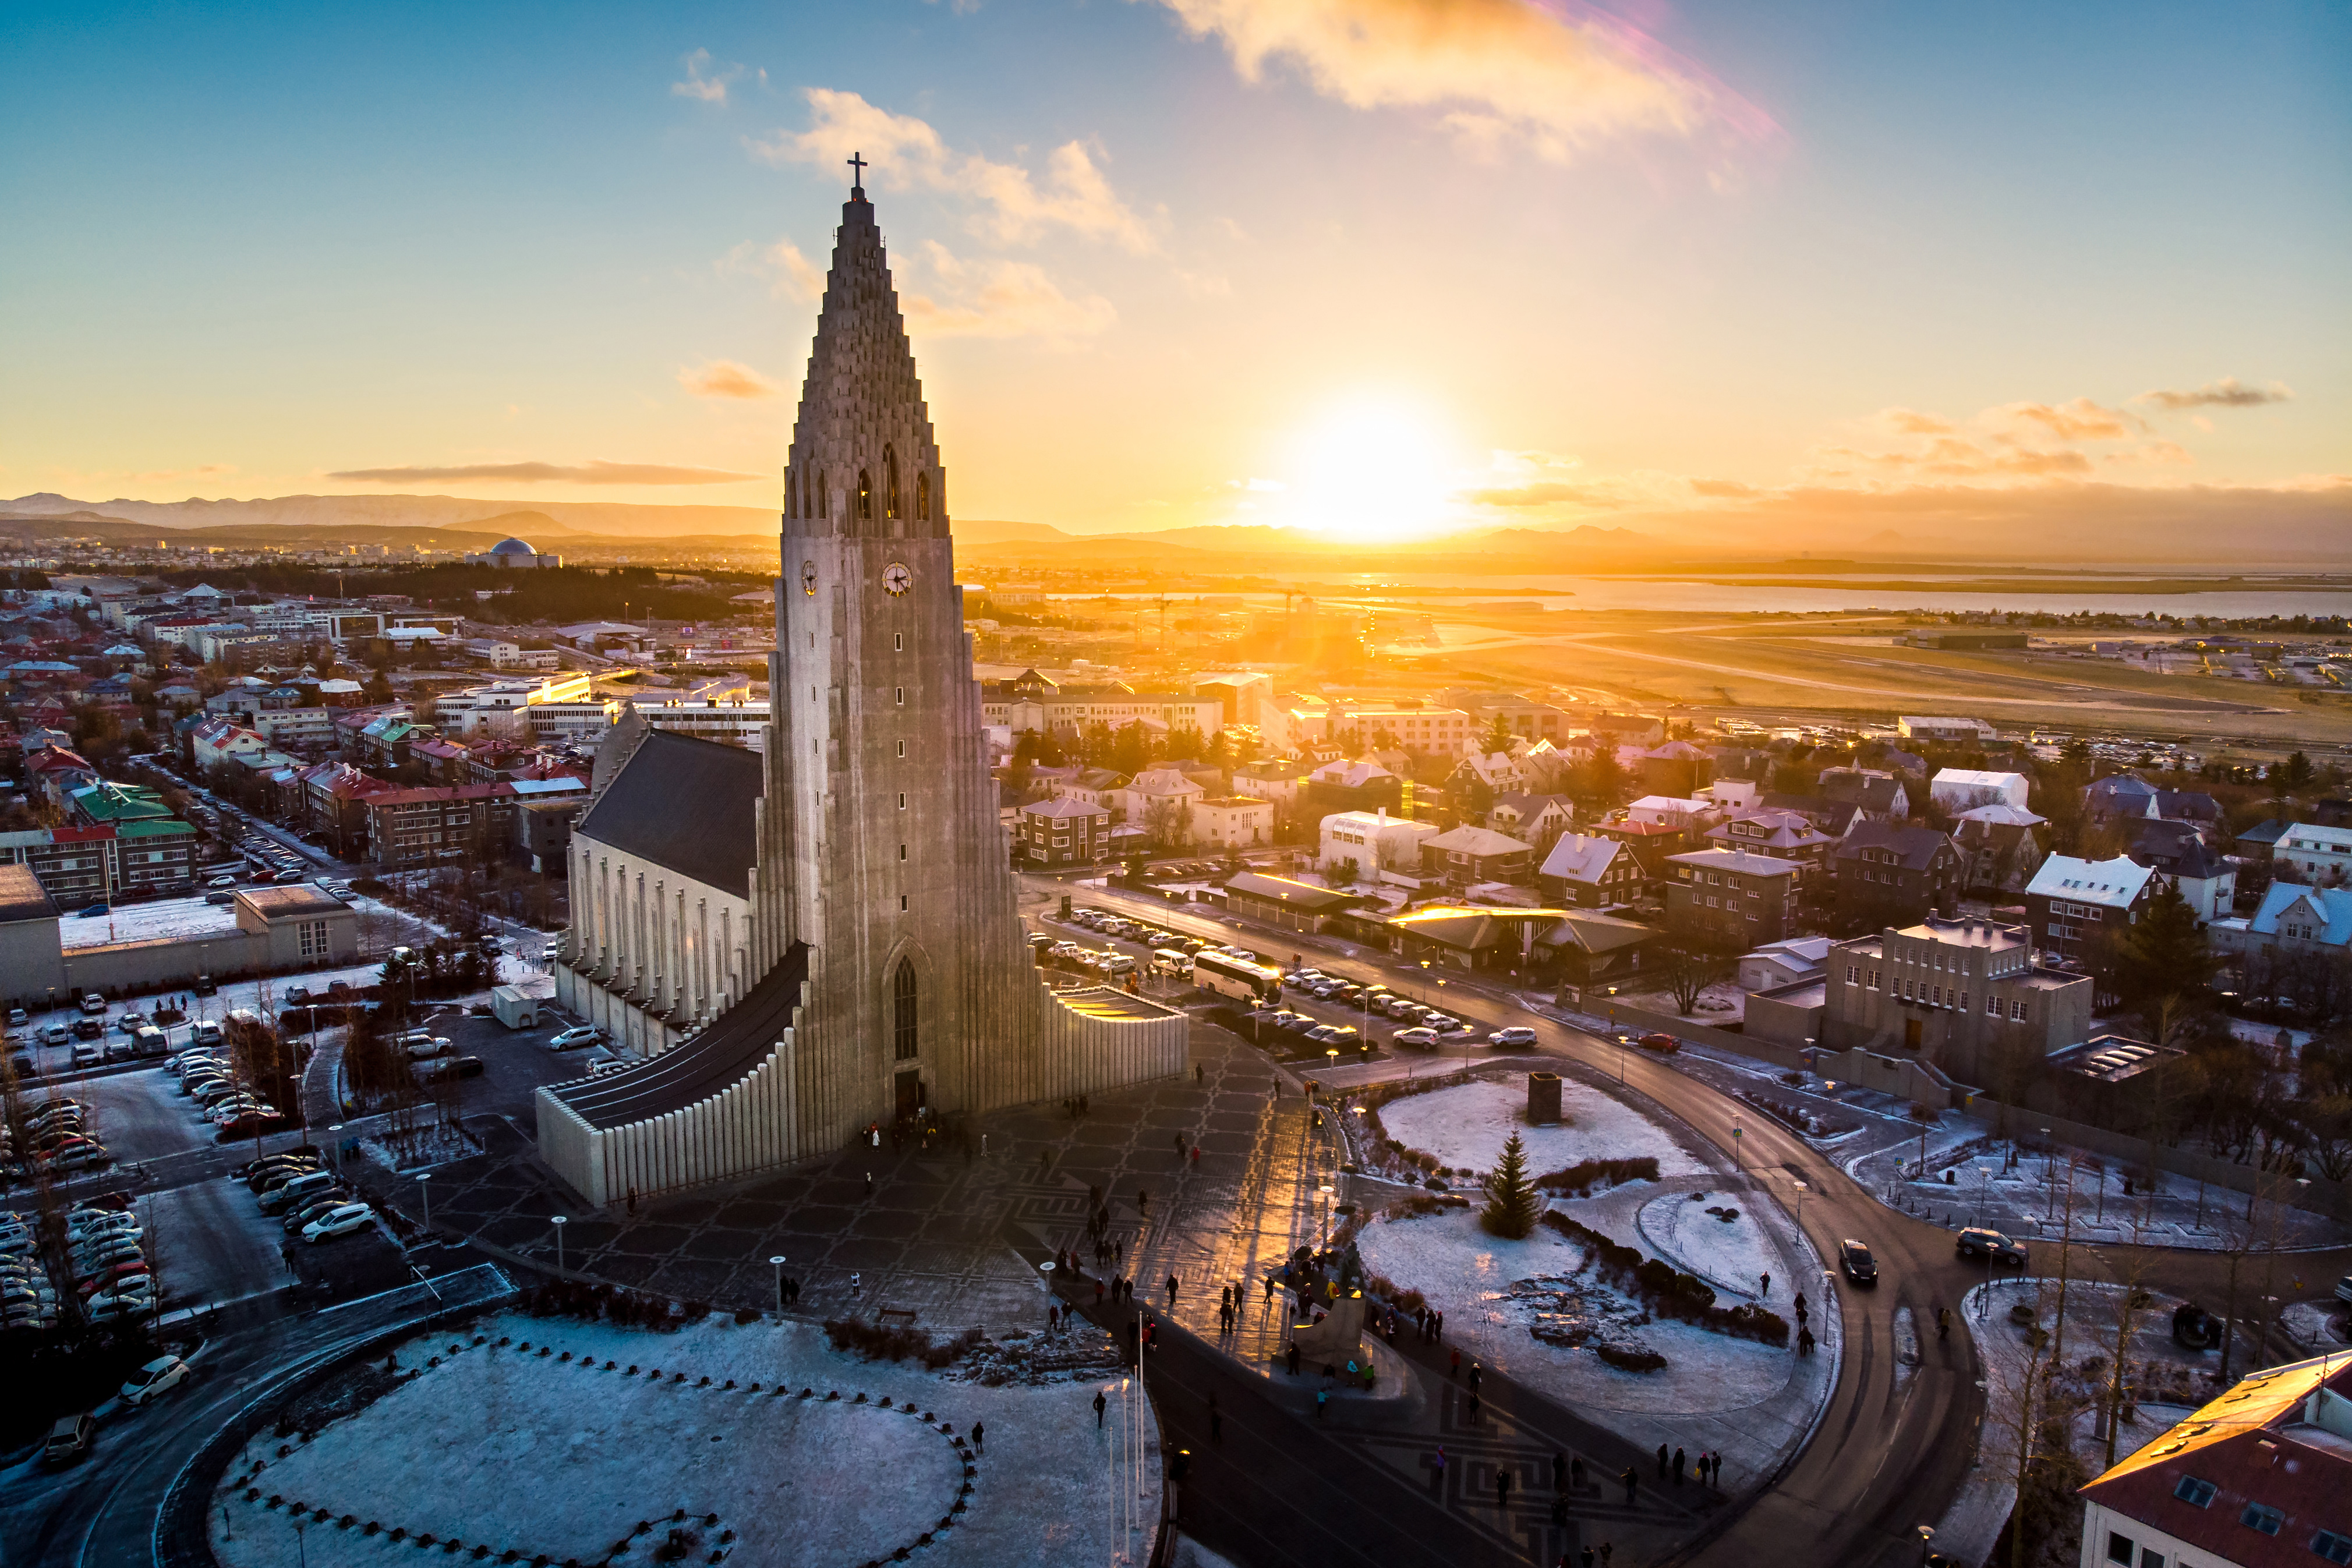 Icelandic residence permit allows foreigners to live in the beautiful country